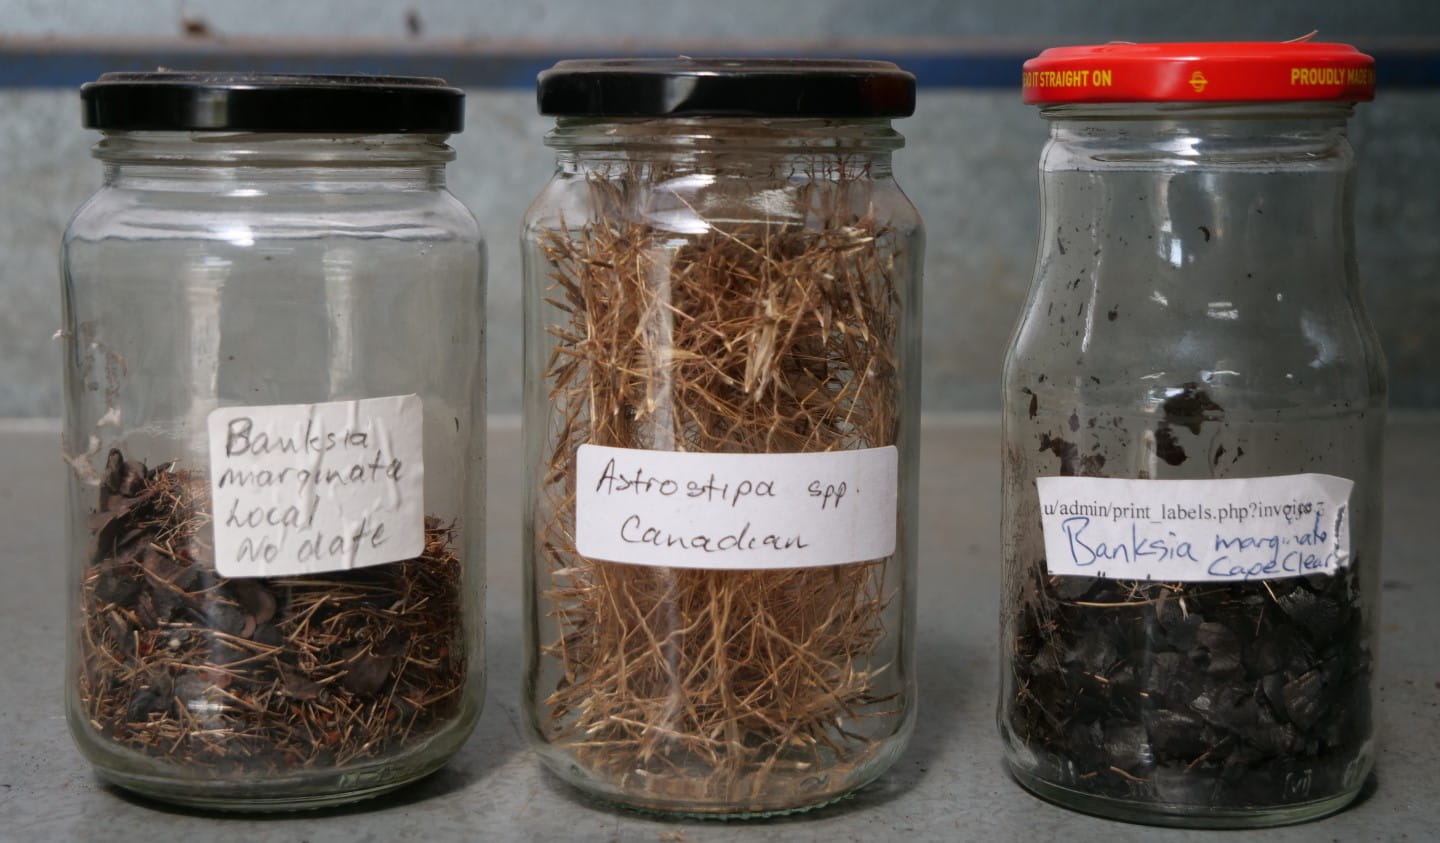 The seeds are stored in glass jars until they are ready to be planted.